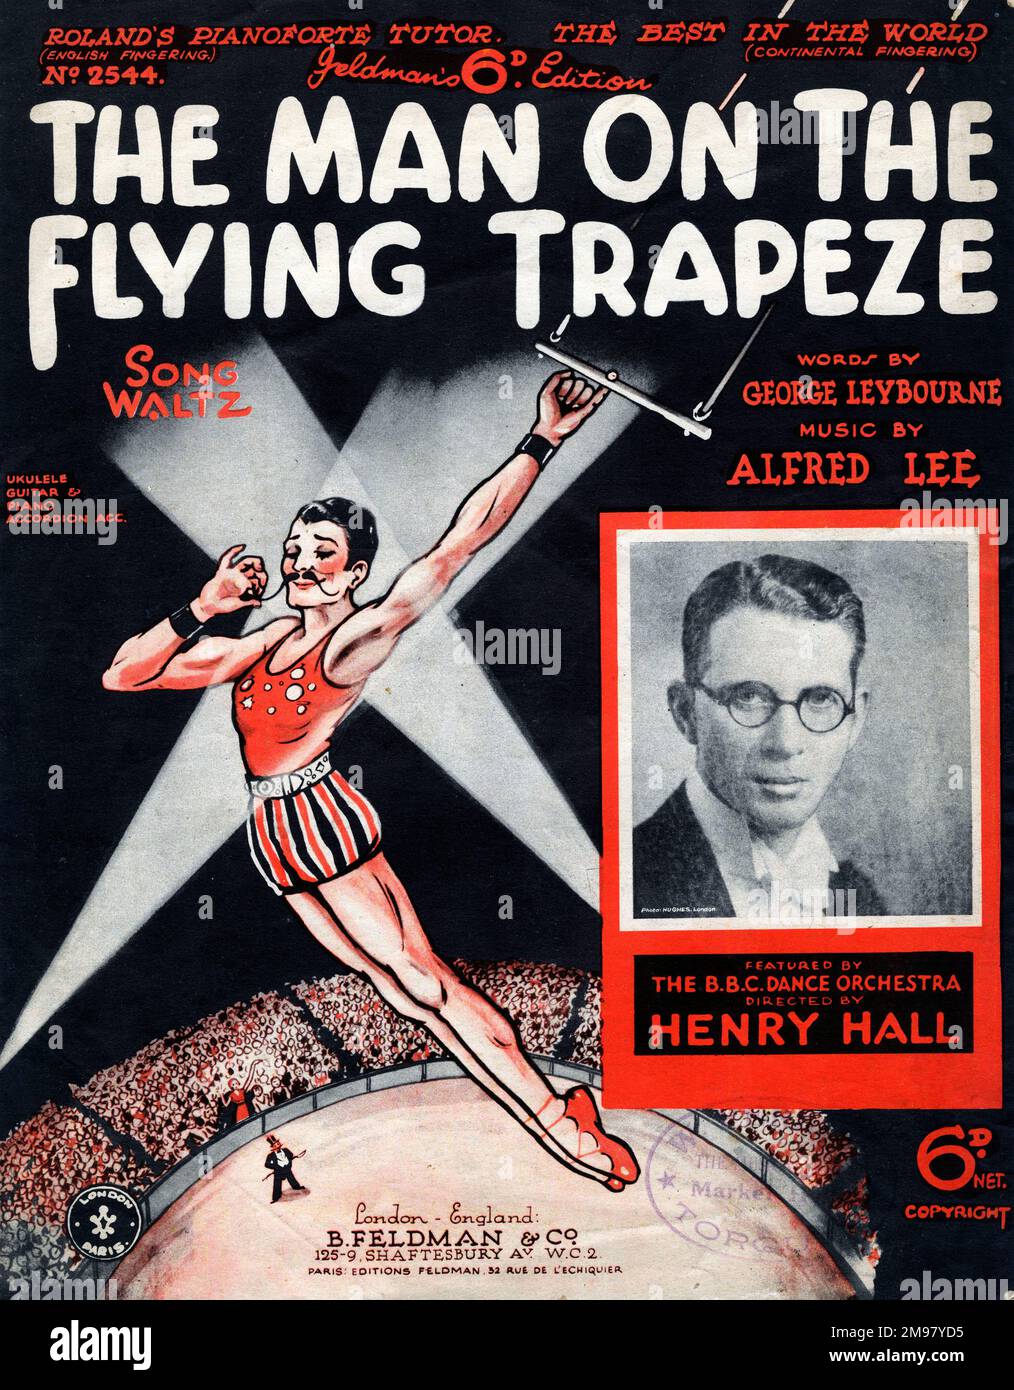 Music cover, The Man on the Flying Trapeze, song in waltz time, words by George Leybourne, music by Alfred Lee, featured by the BBC Dance Orchestra directed by Henry Hall. Stock Photo